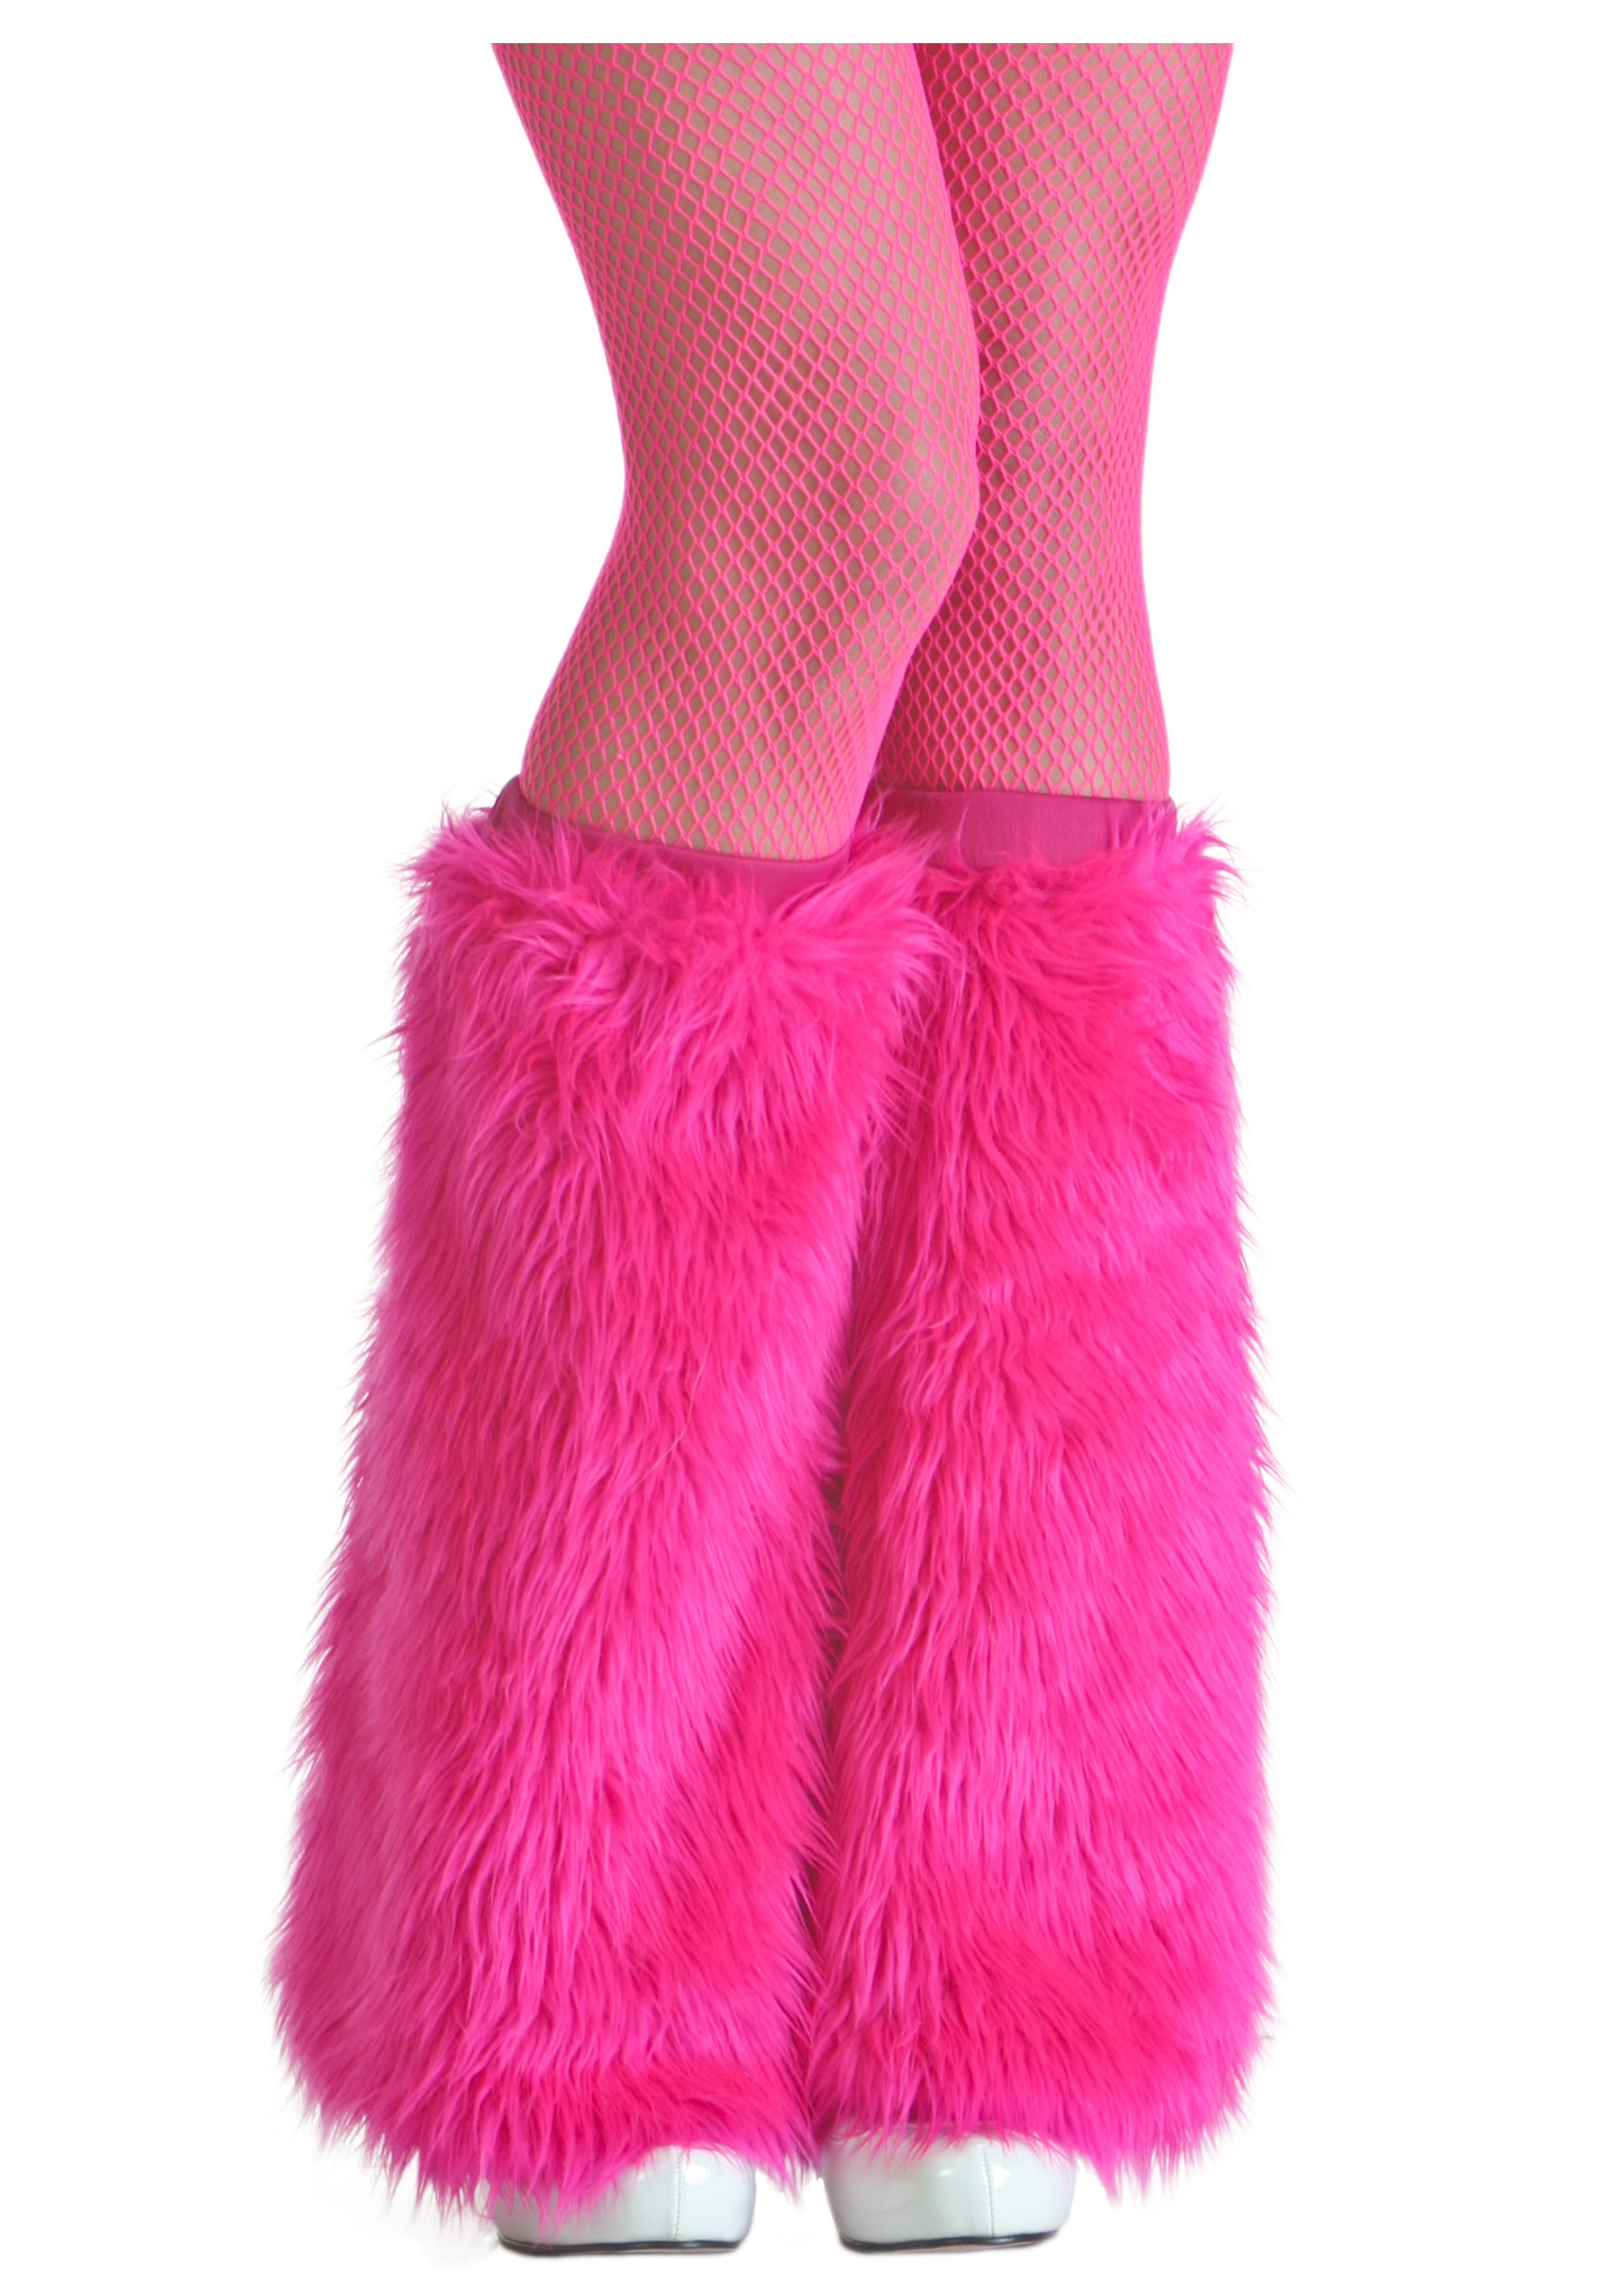 Womens Pink Furry Boot Covers